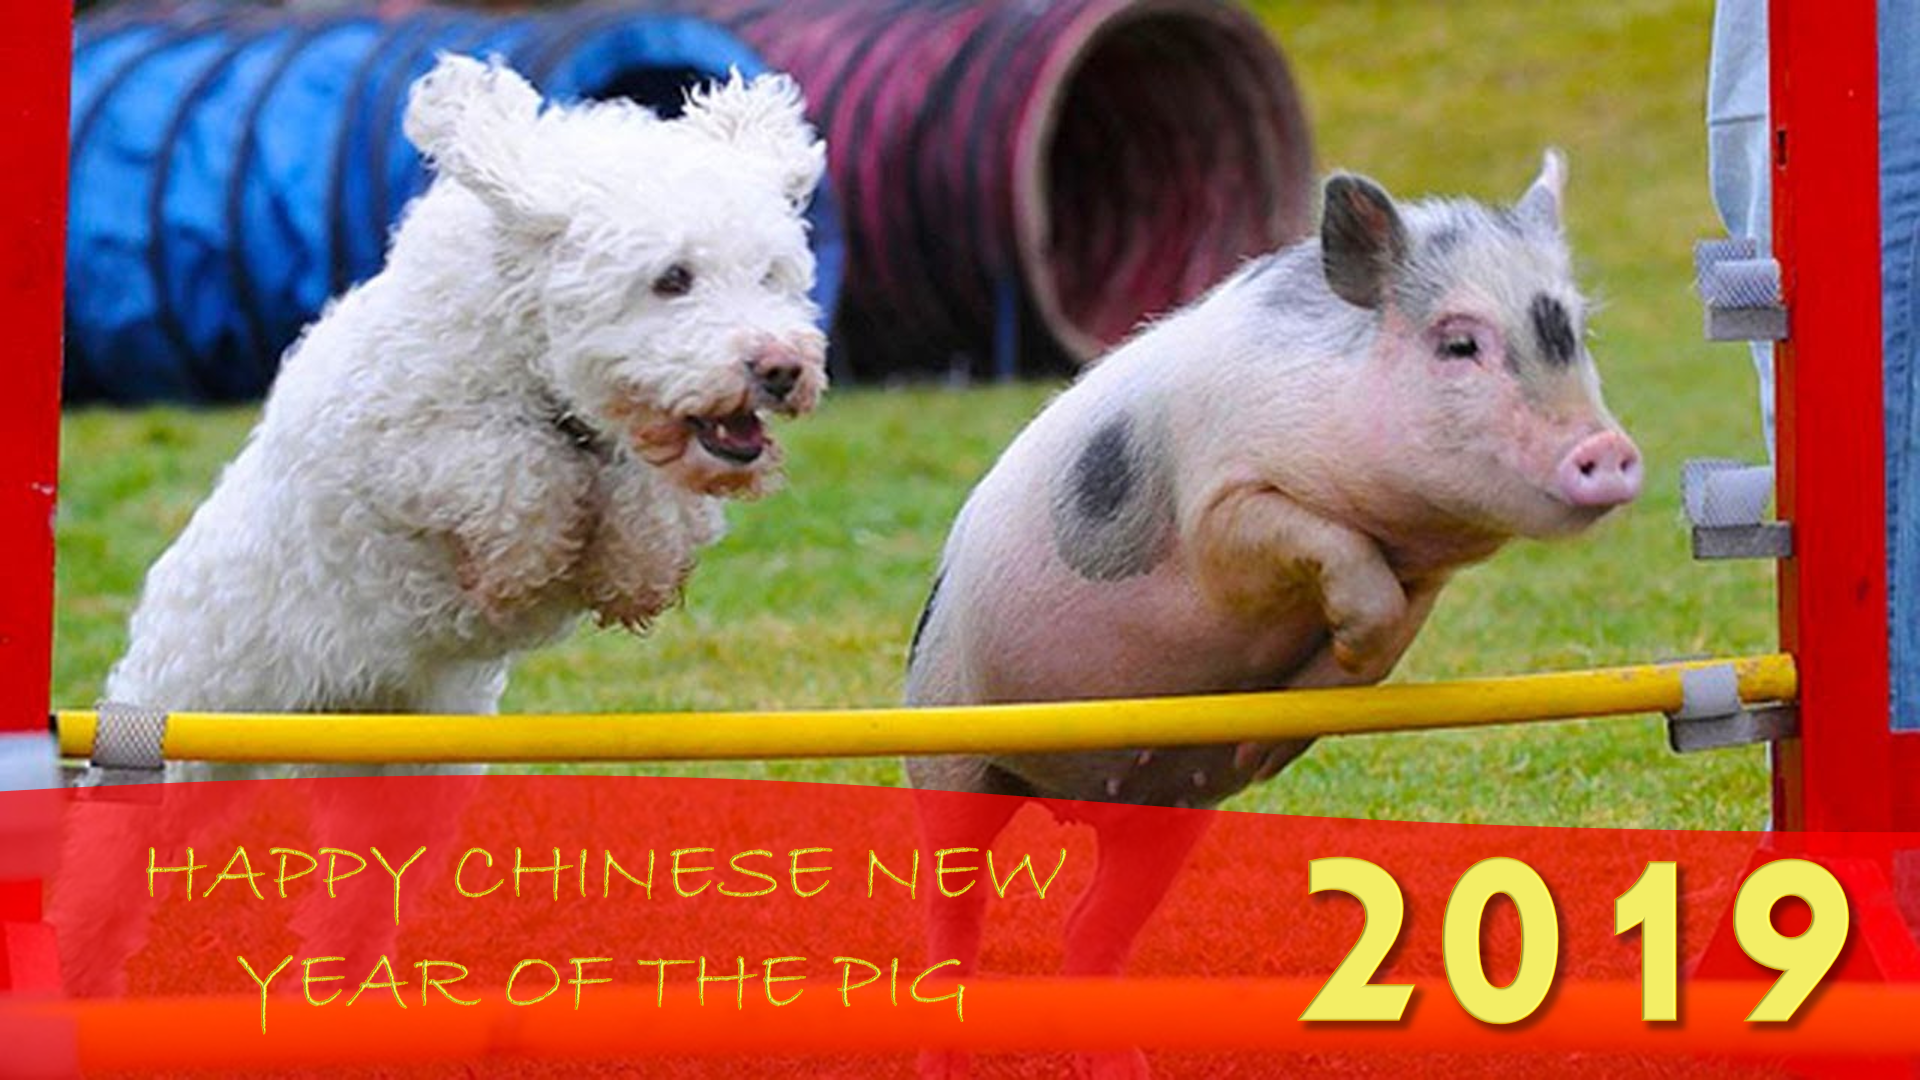 FROM YEAR OF THE DOG, TO YEAR OF THE PIG